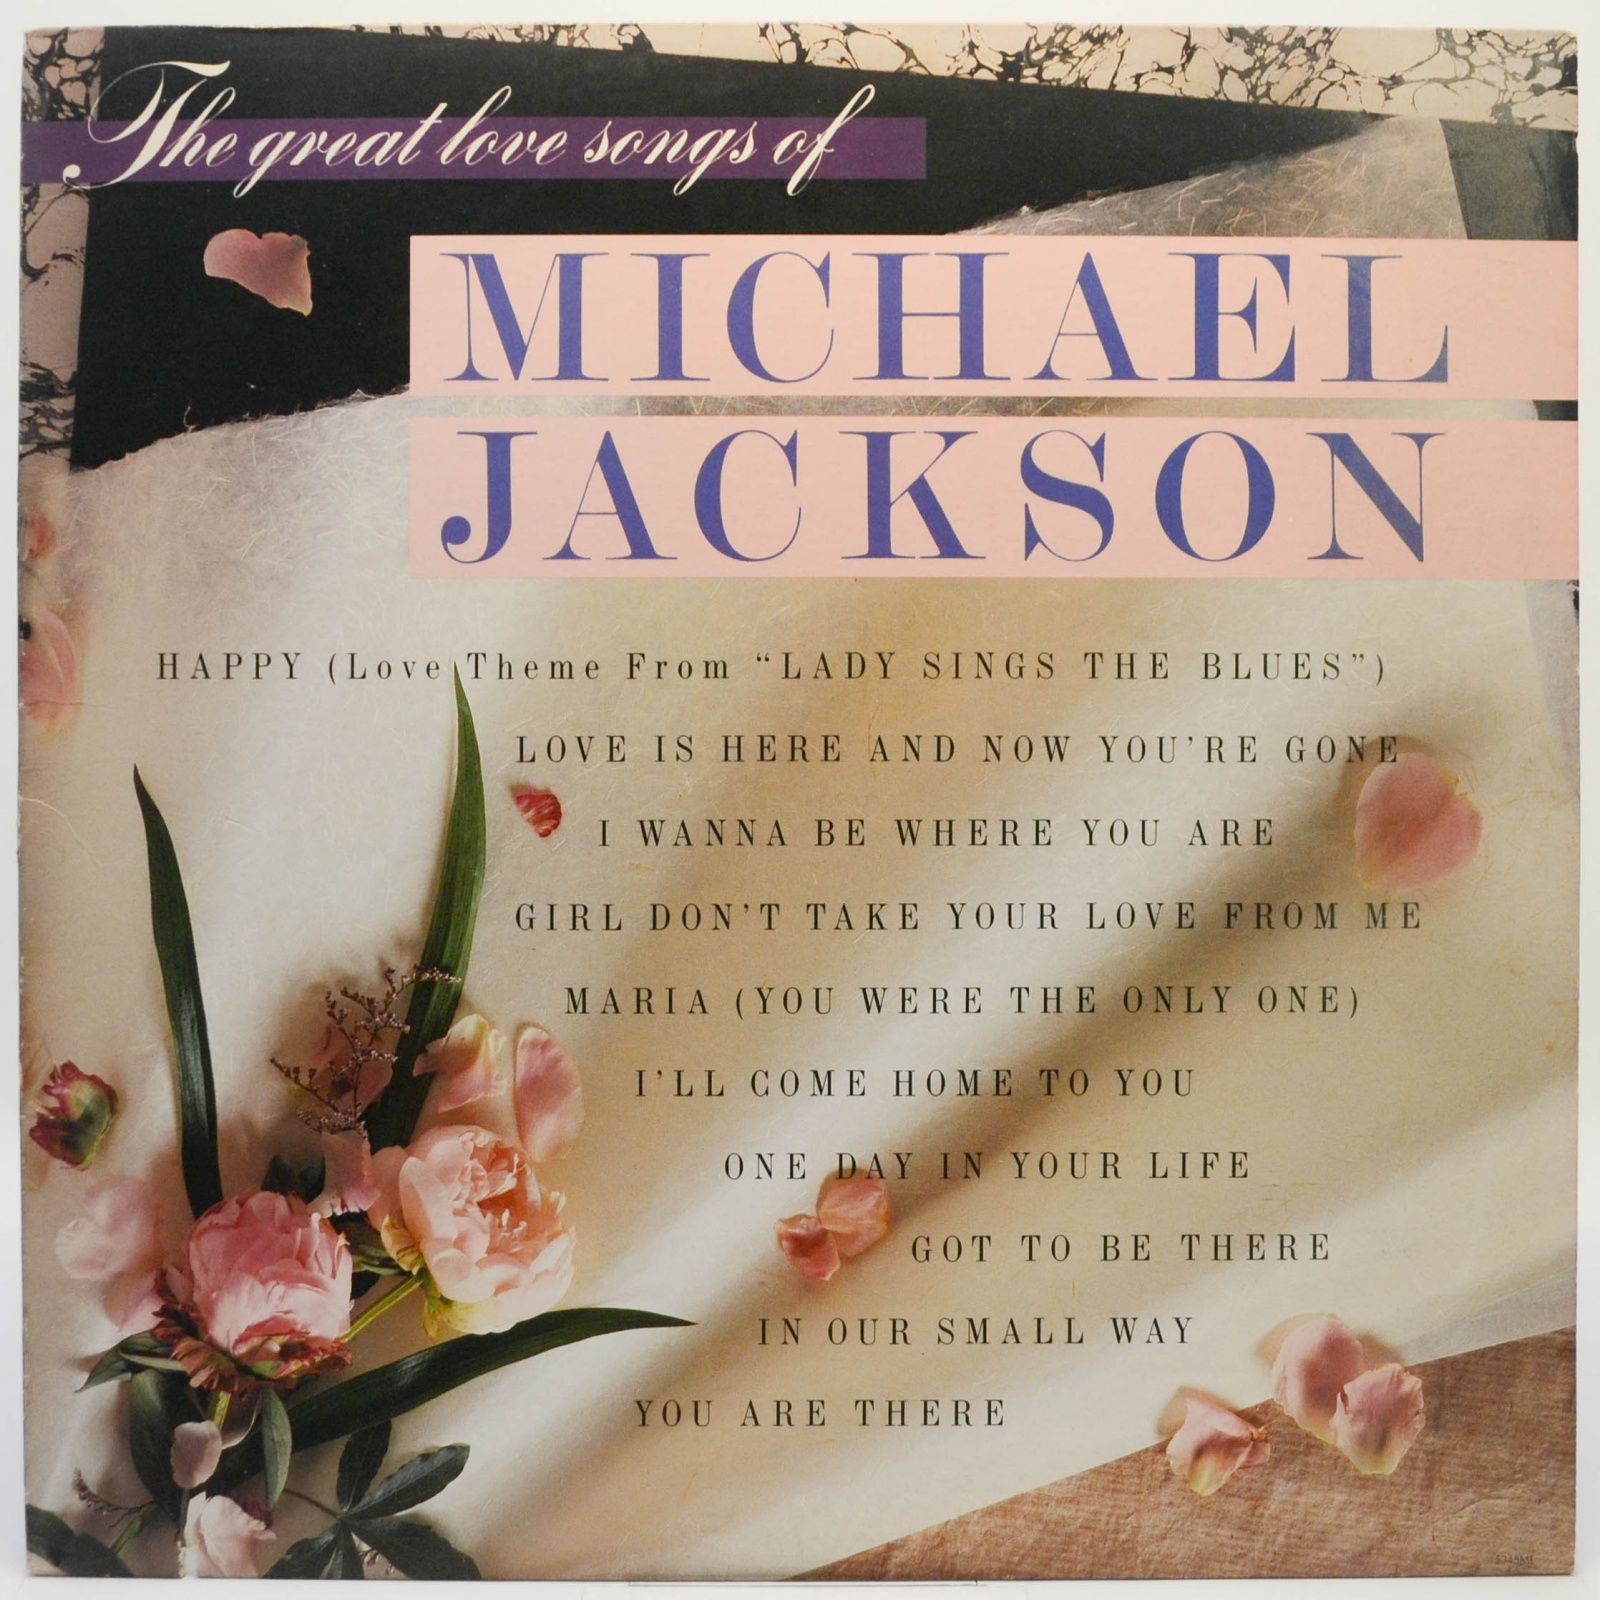 The Great Love Songs Of Michael Jackson, 1984